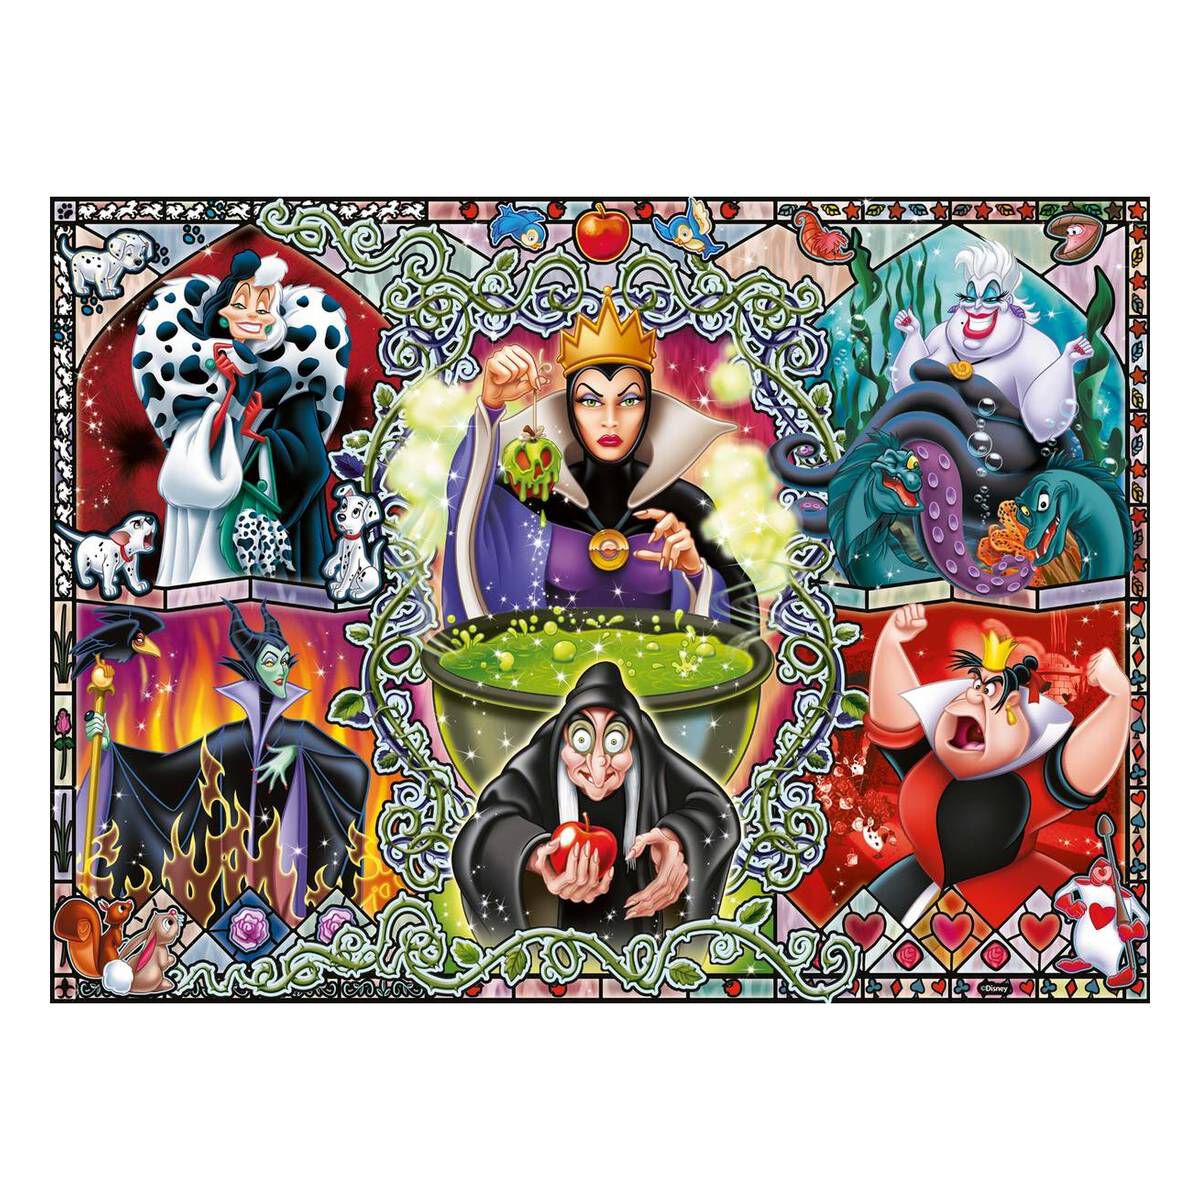 Ravensburger 19252 Disney Wicked Women 1000pc Jigsaw Puzzle for sale online 